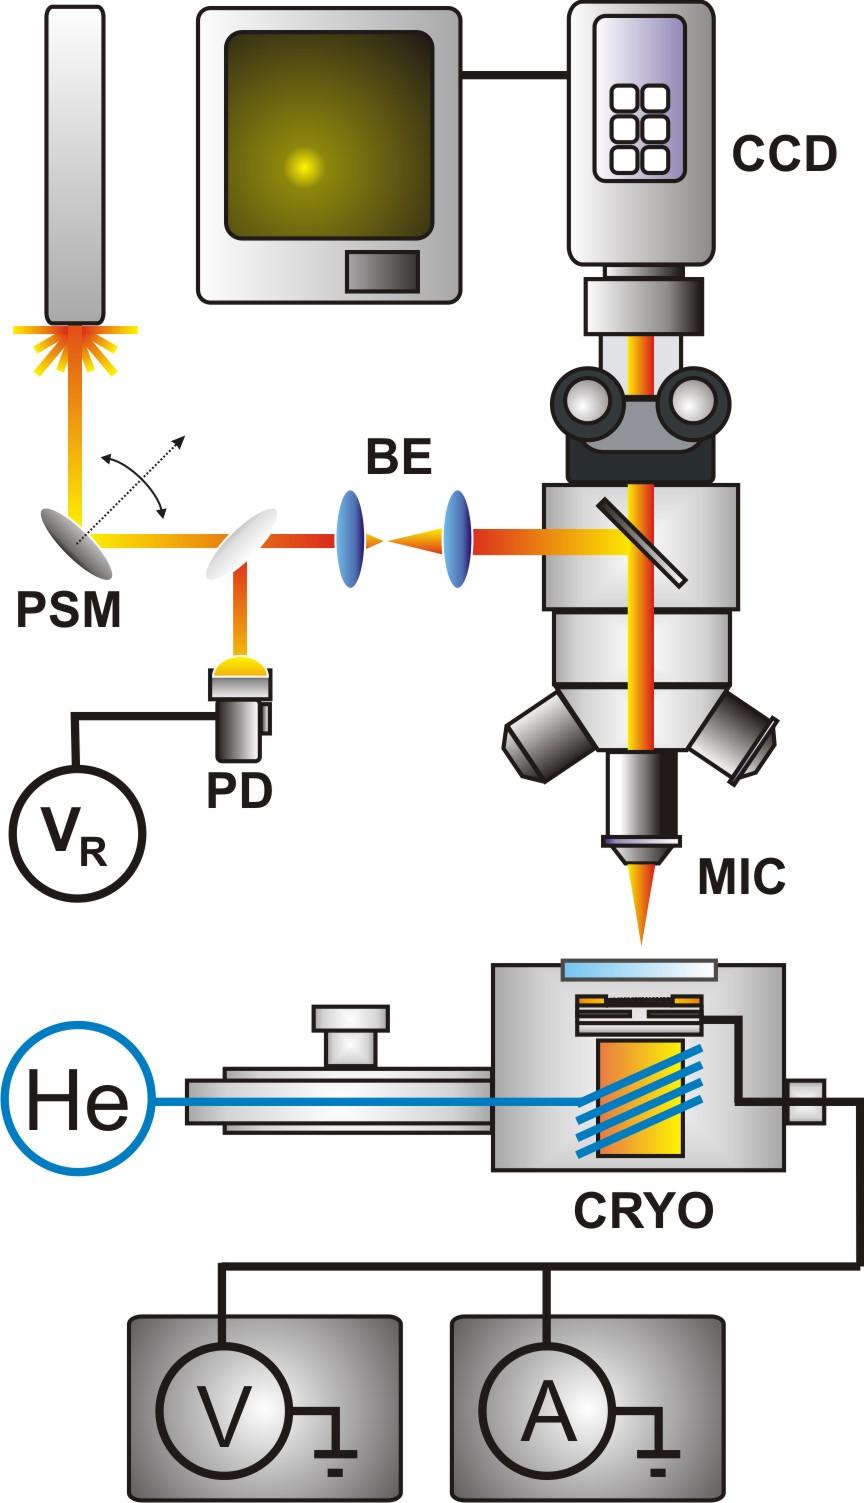 Fig. S1 Optoelectronic setup for measuring photocurrent in the graphene p-n junction.